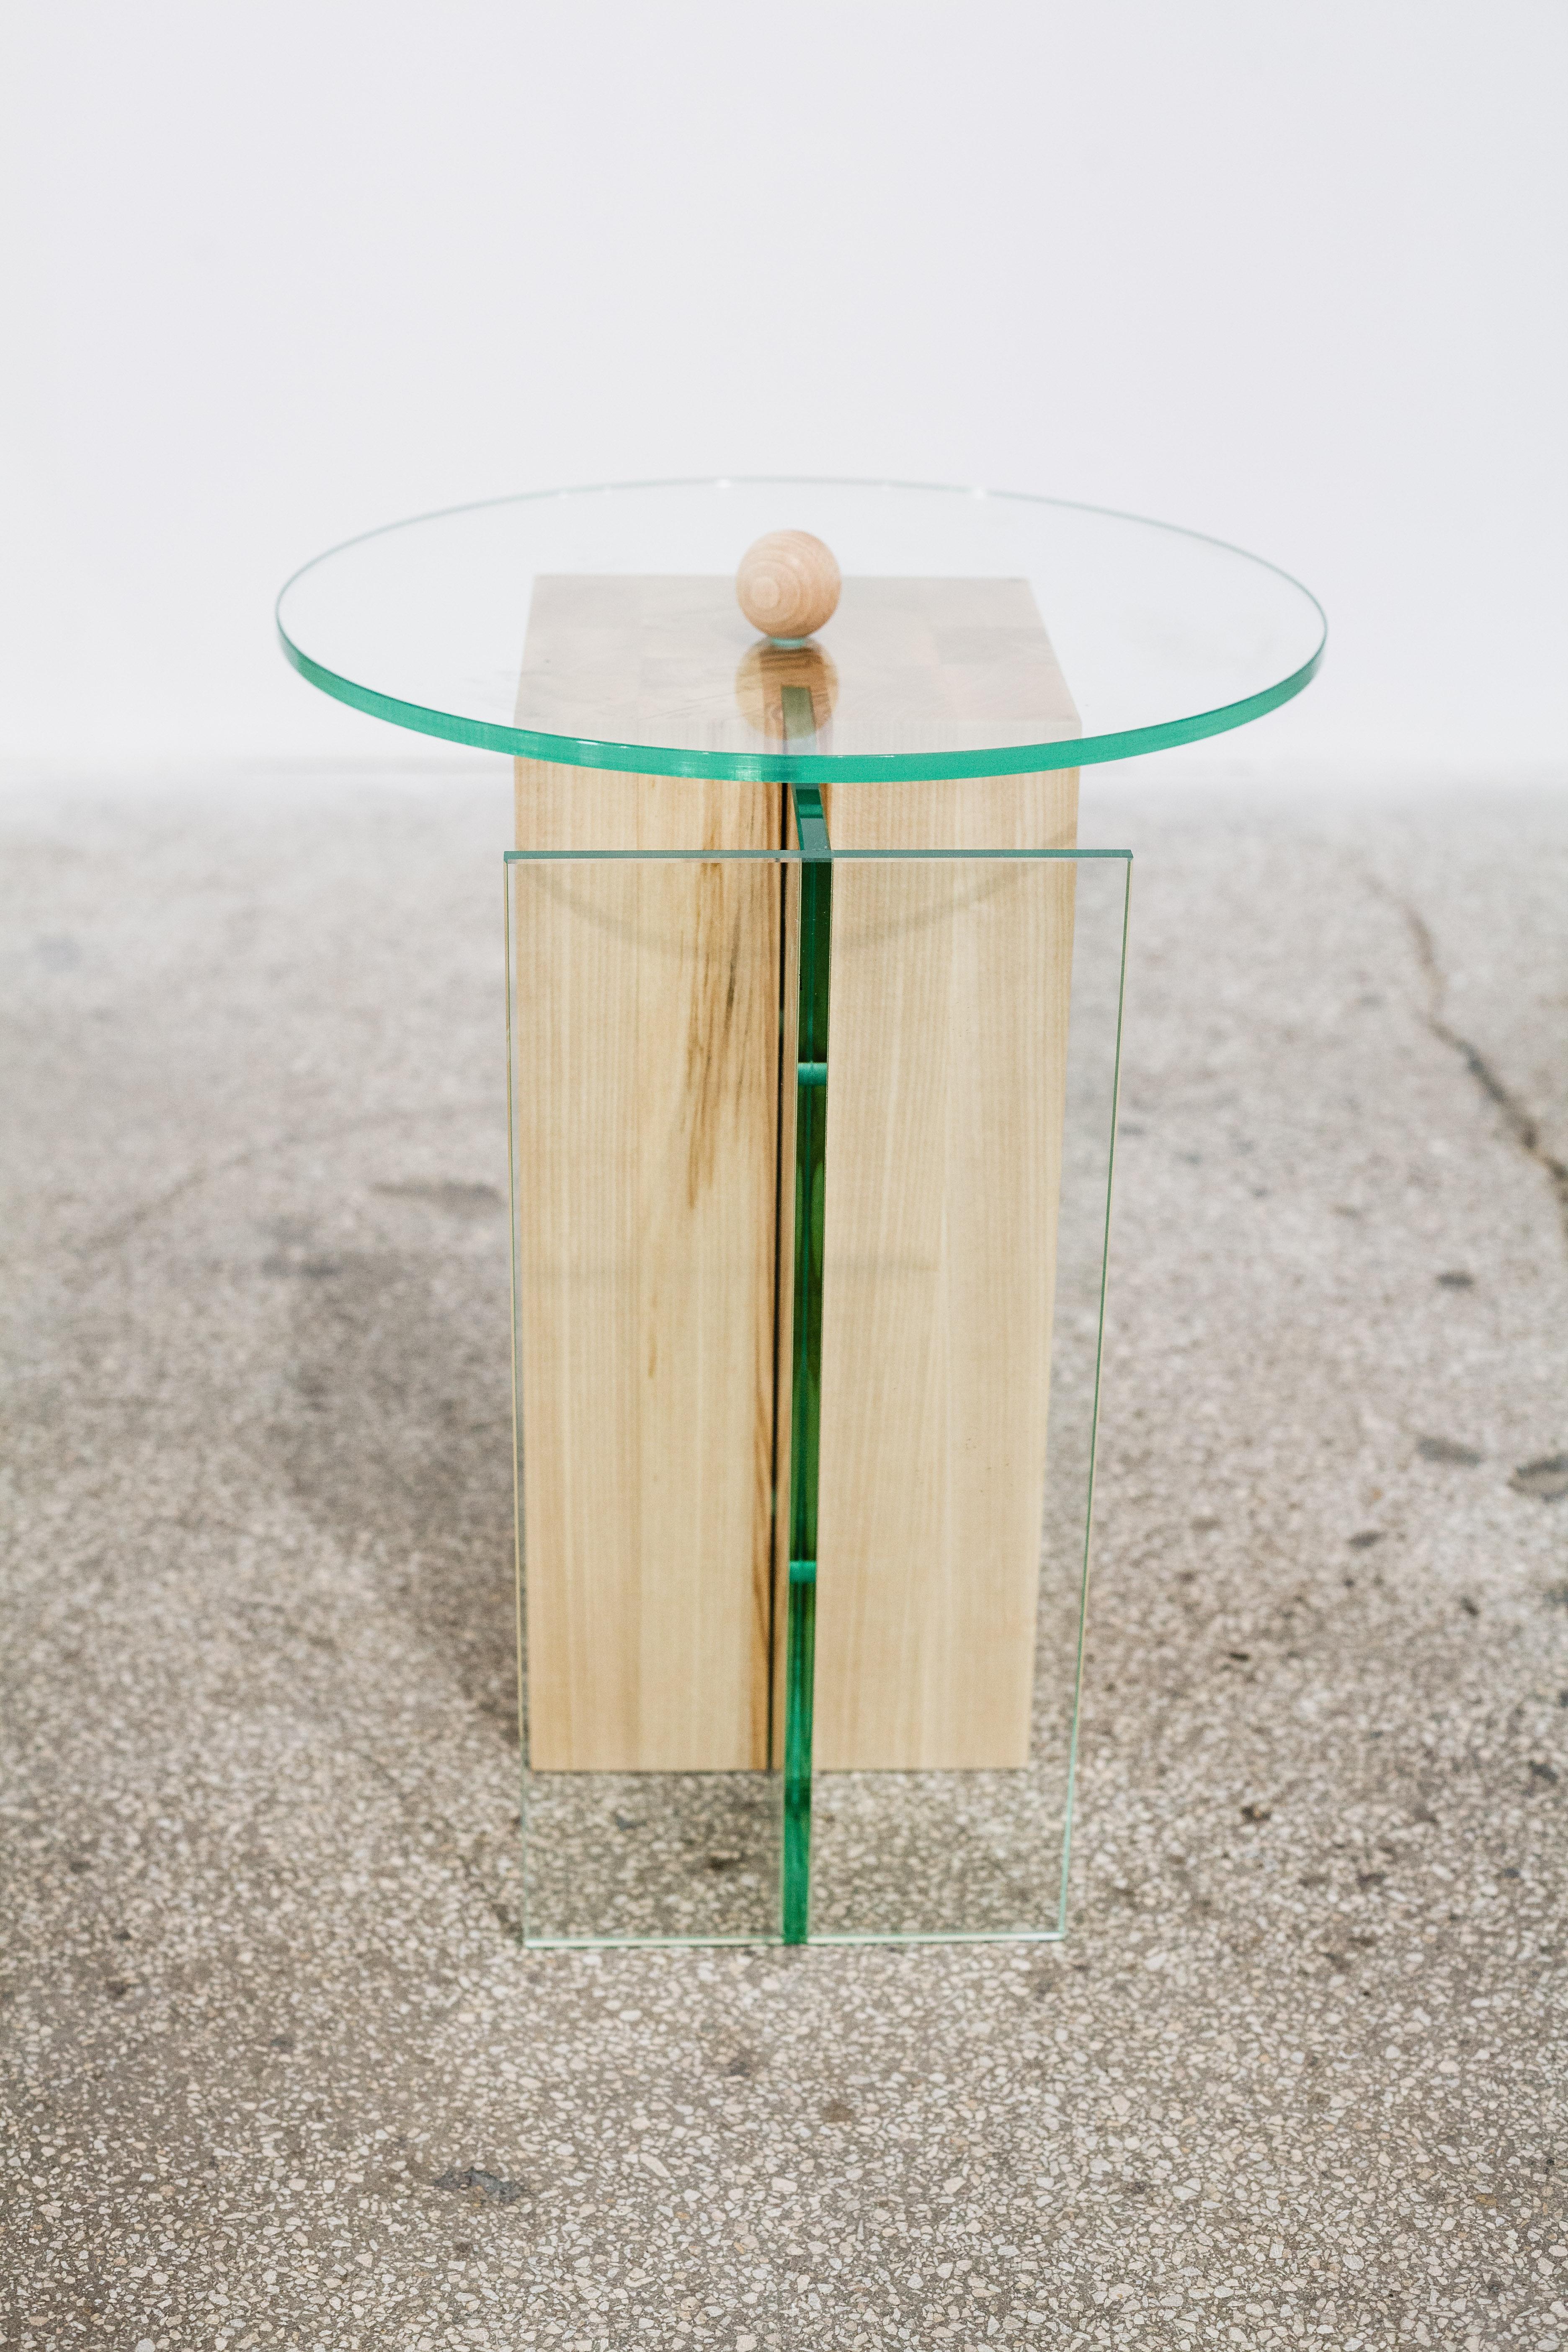 A massive rectangular shaped ash wood volume, in composition with glass, that serves as a side table/object. The object is part of a series named Form before function, where the focus is moved on the aesthetic of each object, rather than on its